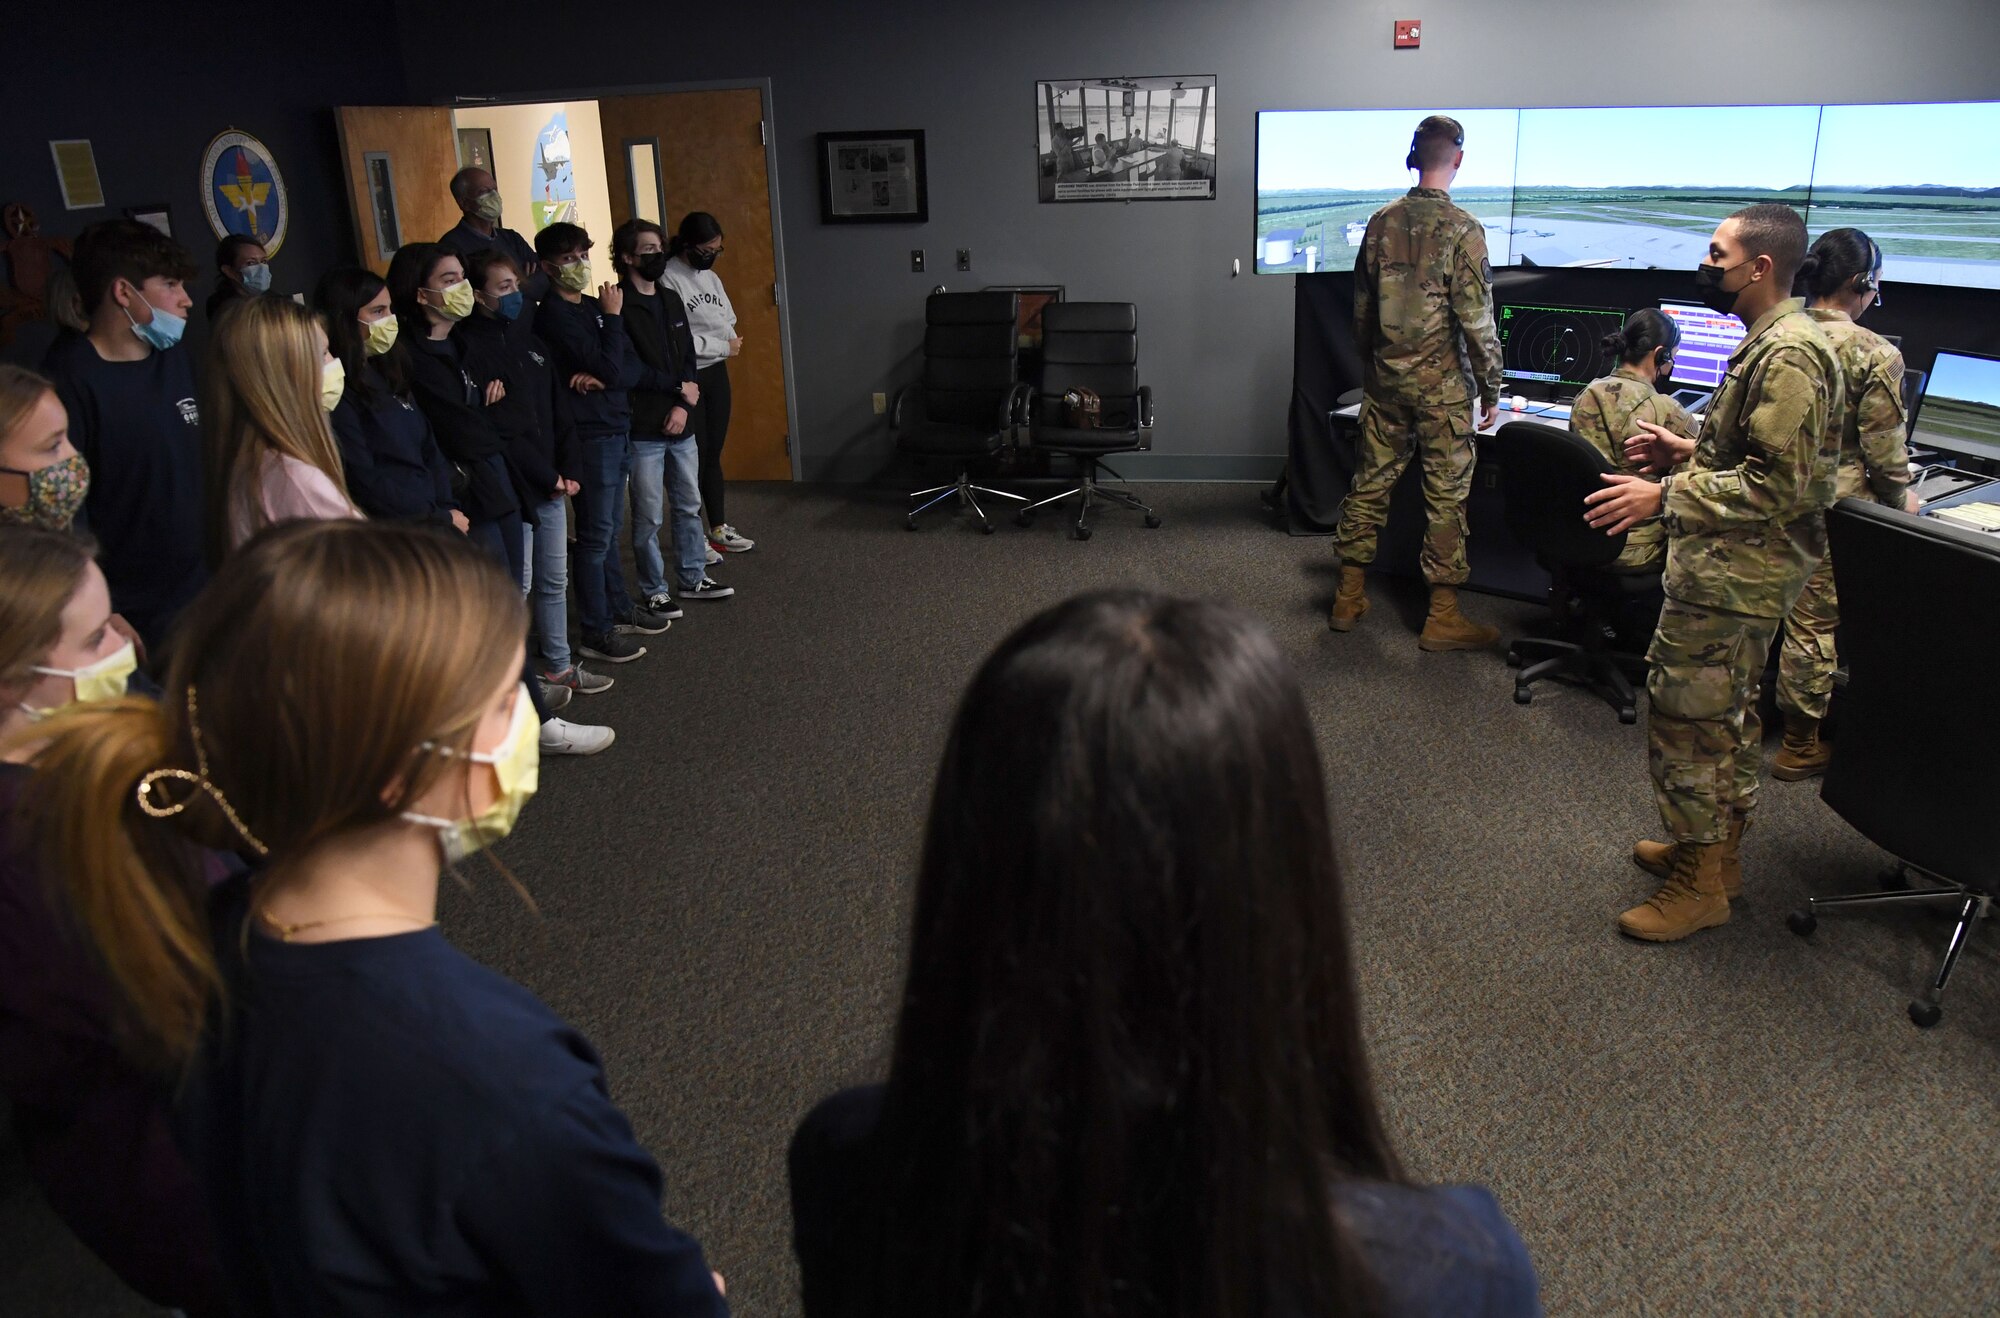 U.S. Air Force Airman 1st Class Sean Ware, 334th Training Squadron student, briefs air traffic control training procedures to high school students inside Cody Hall during a tour at Keesler Air Force Base, Mississippi, Jan. 25, 2022. Approximately 20 Freshmen from Biloxi High School and St. Patrick Catholic High School participated in the Biloxi Chamber of Commerce Junior Leadership Program whose purpose is to produce students of outstanding character who are more sensitive to the needs of the community and are better able to contribute to society. (U.S. Air Force photo by Kemberly Groue)